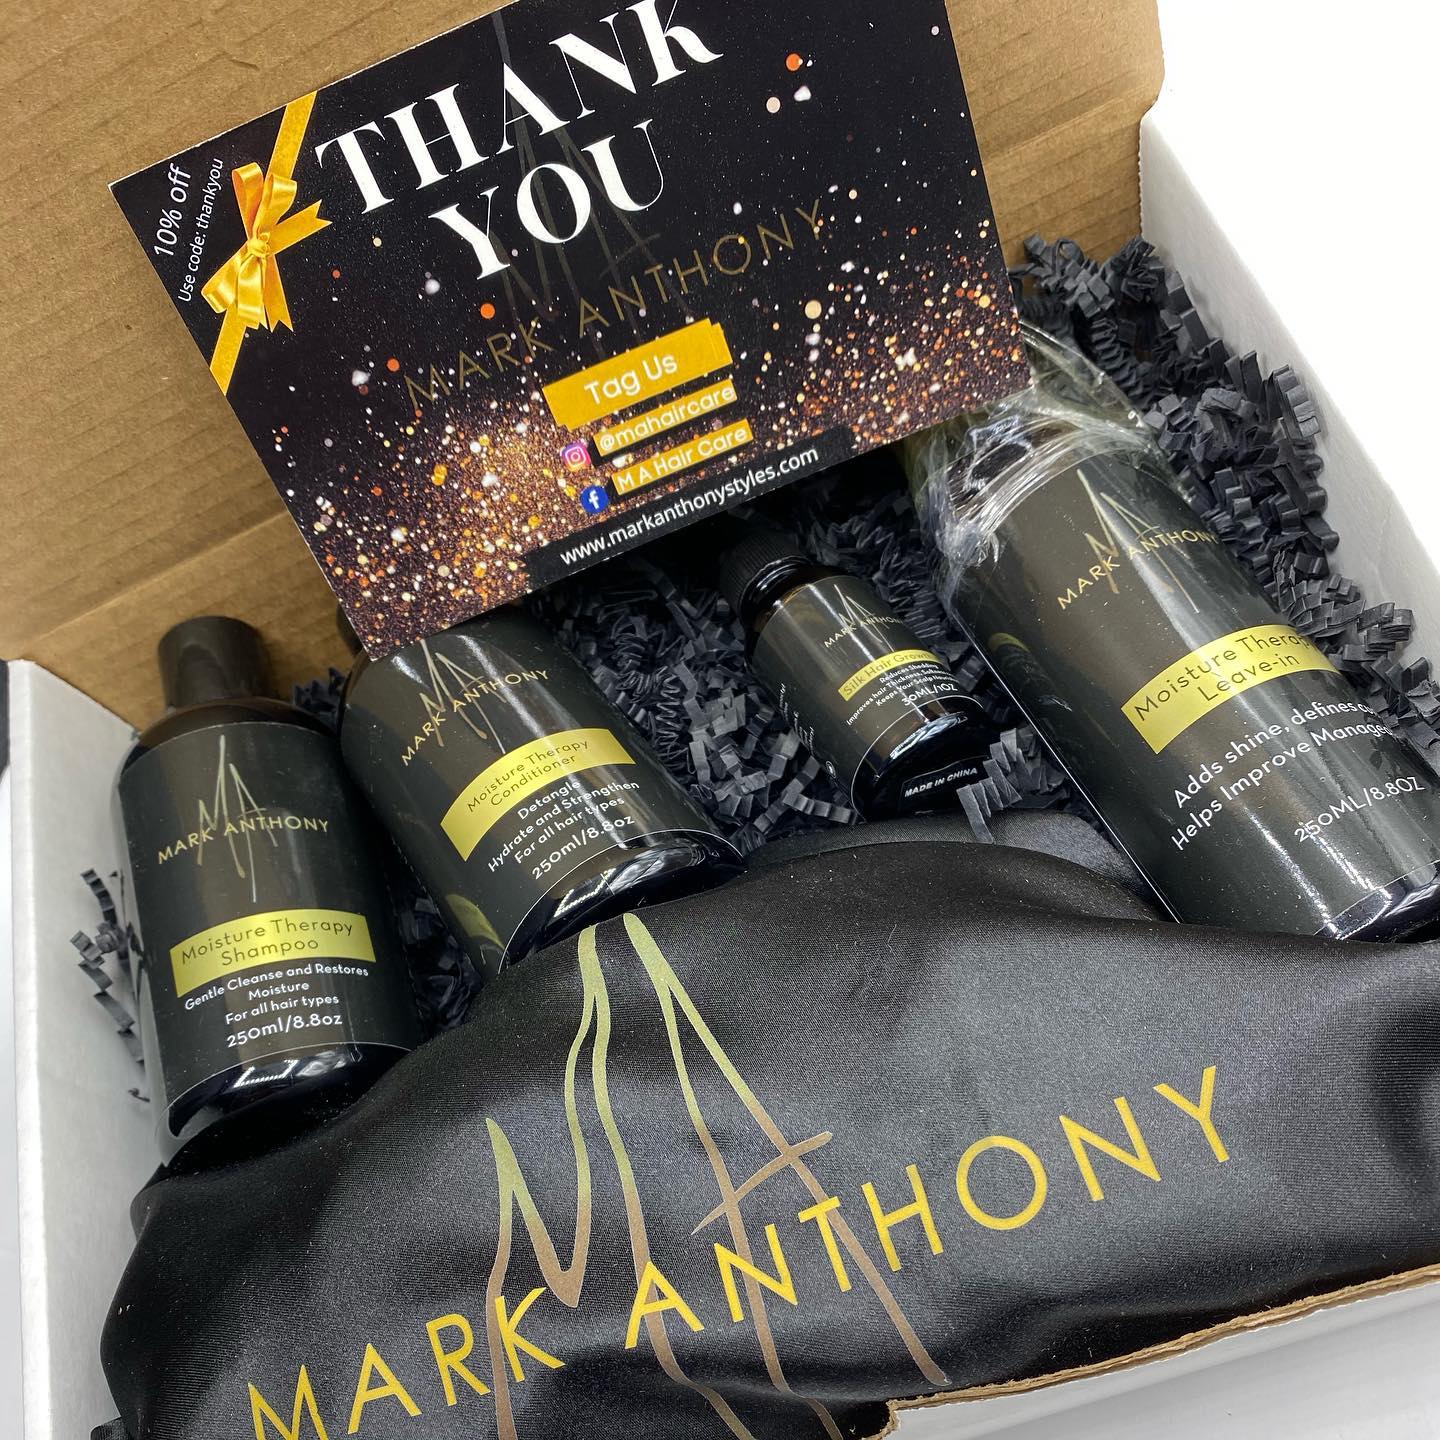 mahaircare Moisture Therapy Sets are going out now!